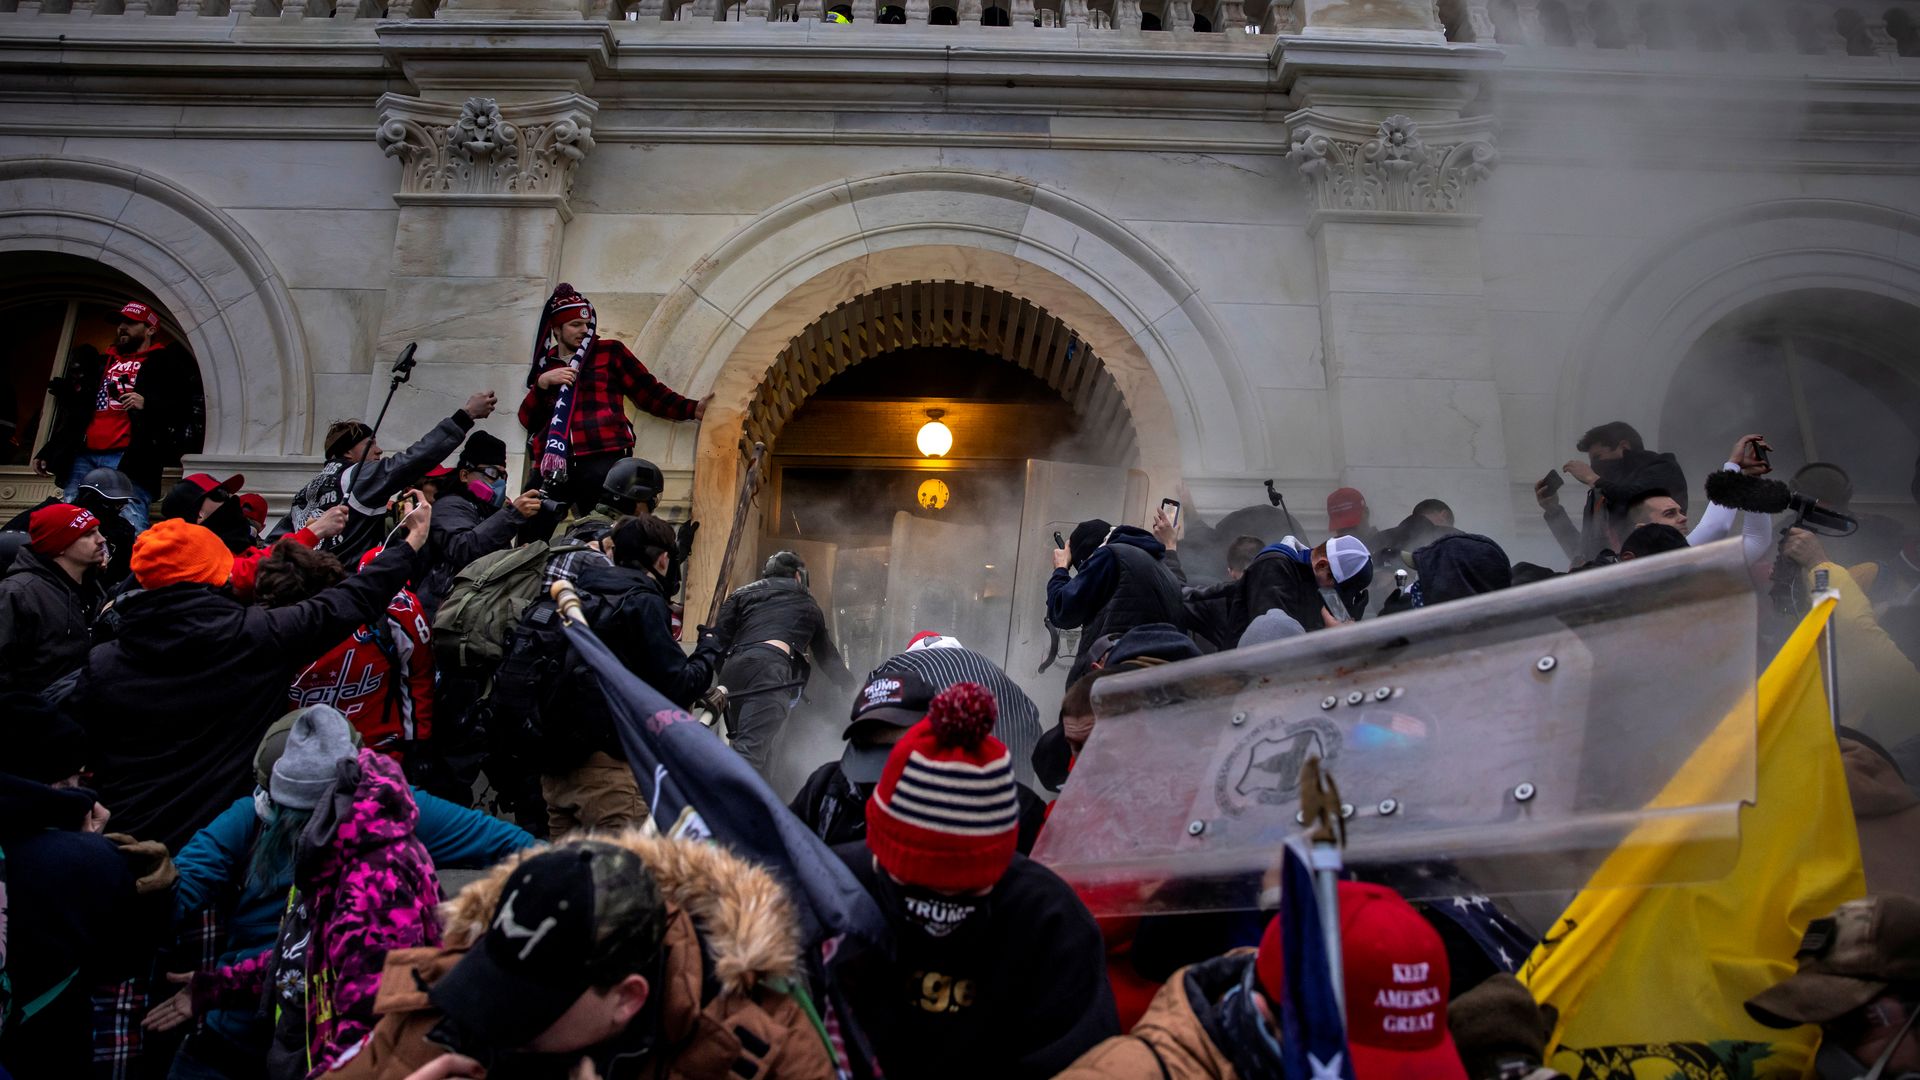 Trump supporters clash with police and security forces as people try to storm the US Capitol on January 6, 2021.